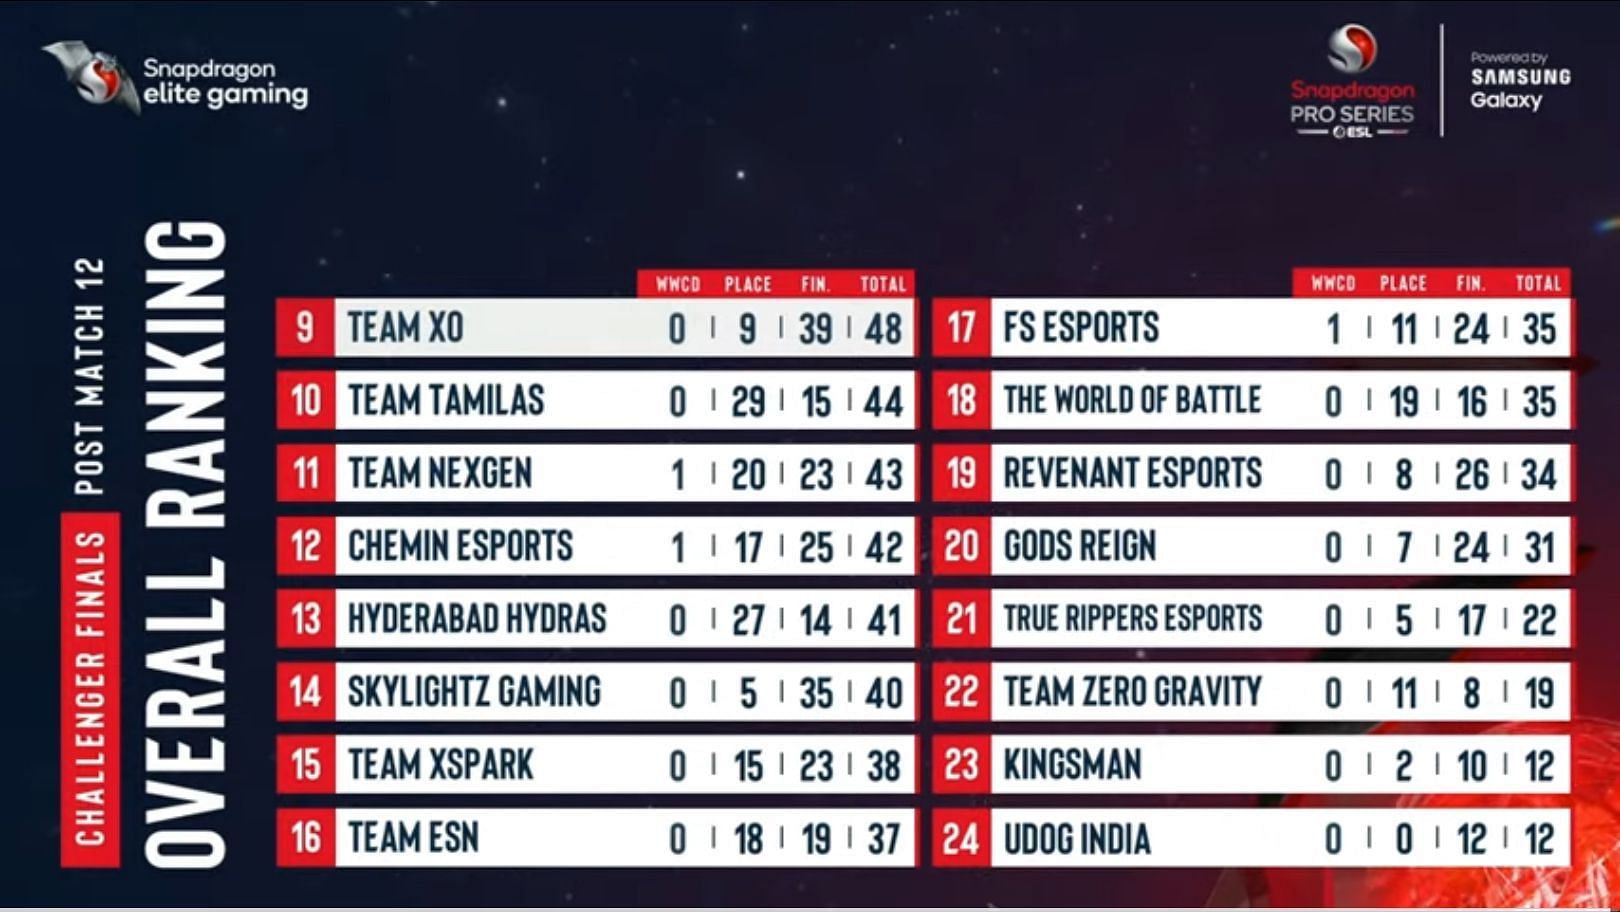 Revenant and Gods Reign came 19th and 20th in the Challenger Finale of PUBG New State Pro Series (image via Nodwin Gaming)